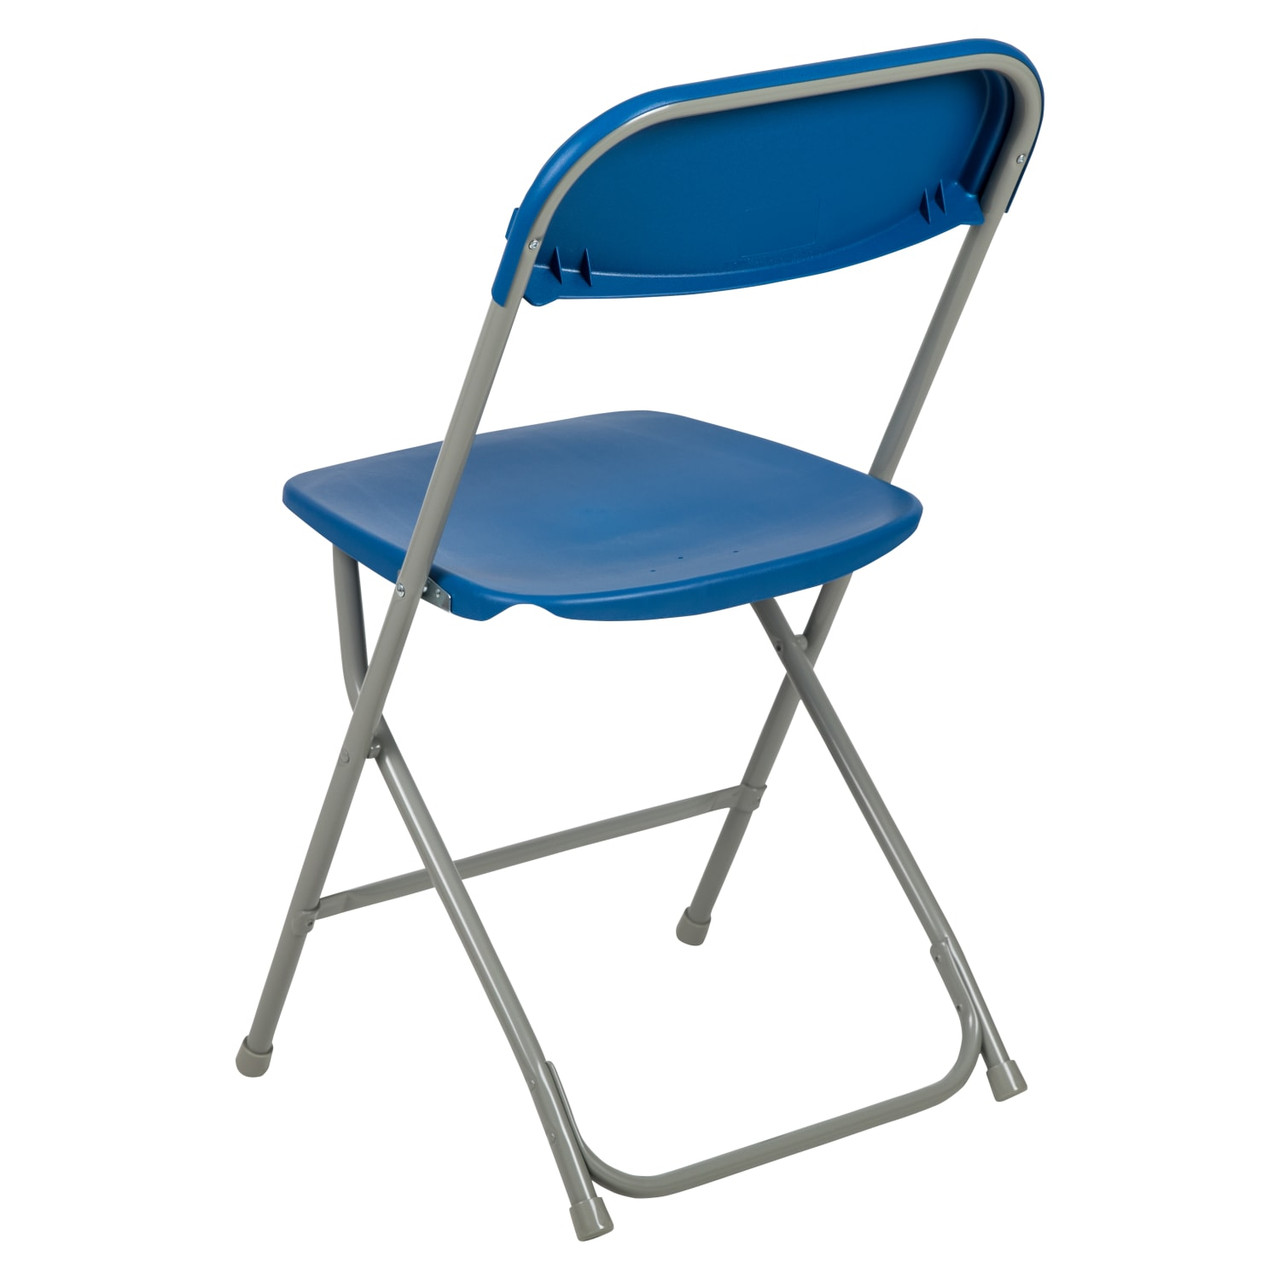 Hercules  Series Plastic Folding Chair - Blue - 10 Pack 650LB Weight Capacity Comfortable Event Chair-Lightweight Folding Chair